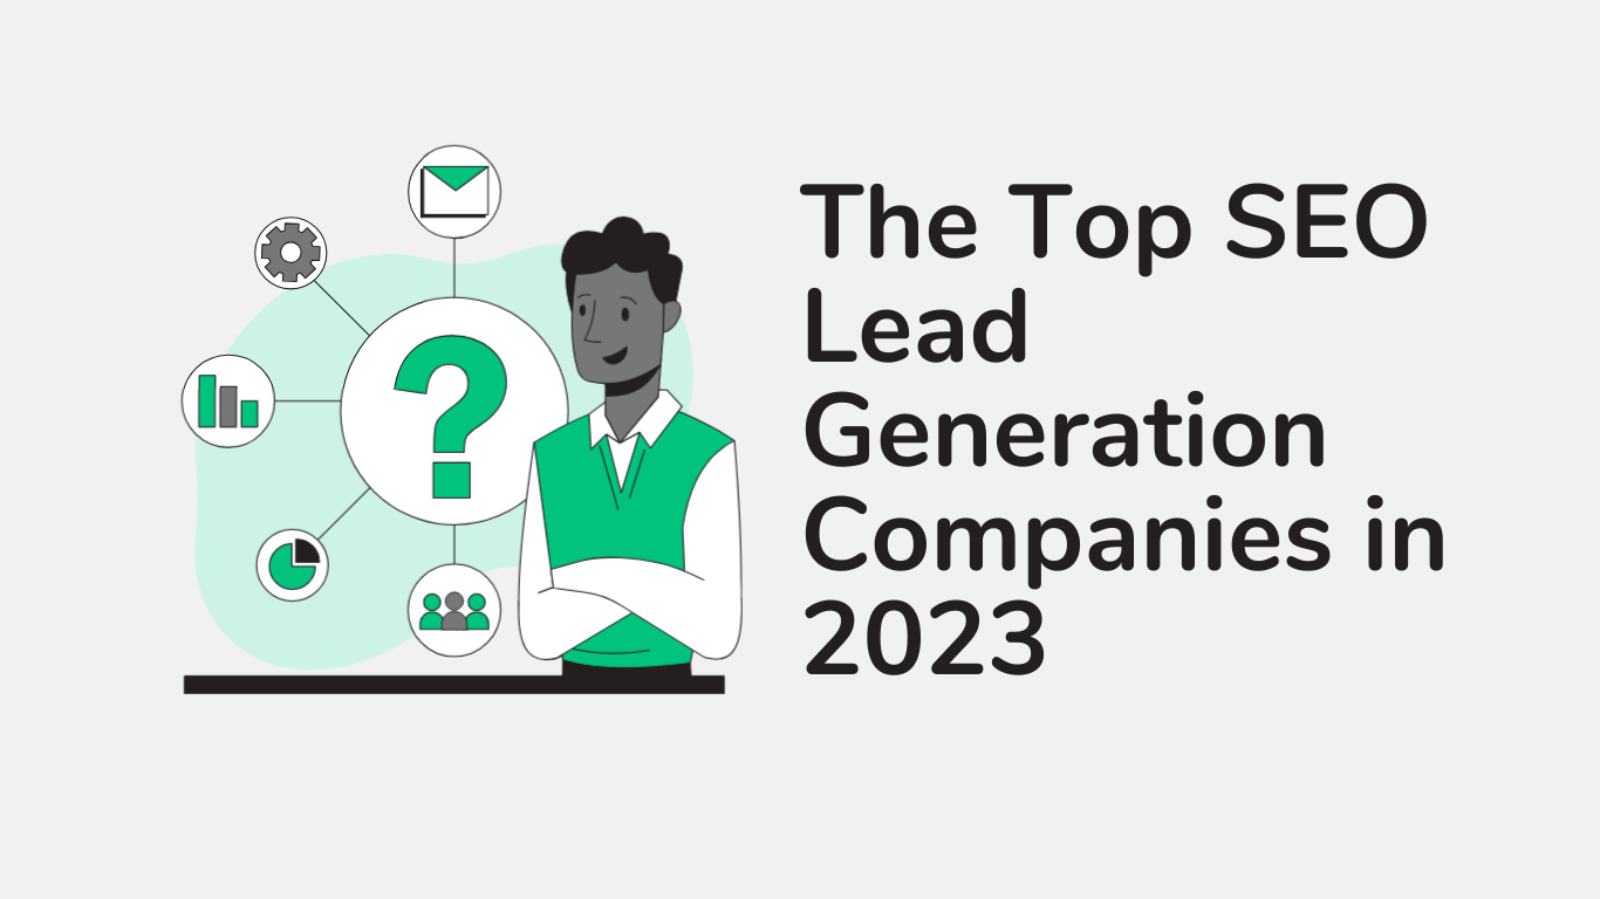 The Top SEO Lead Generation Companies in 2023